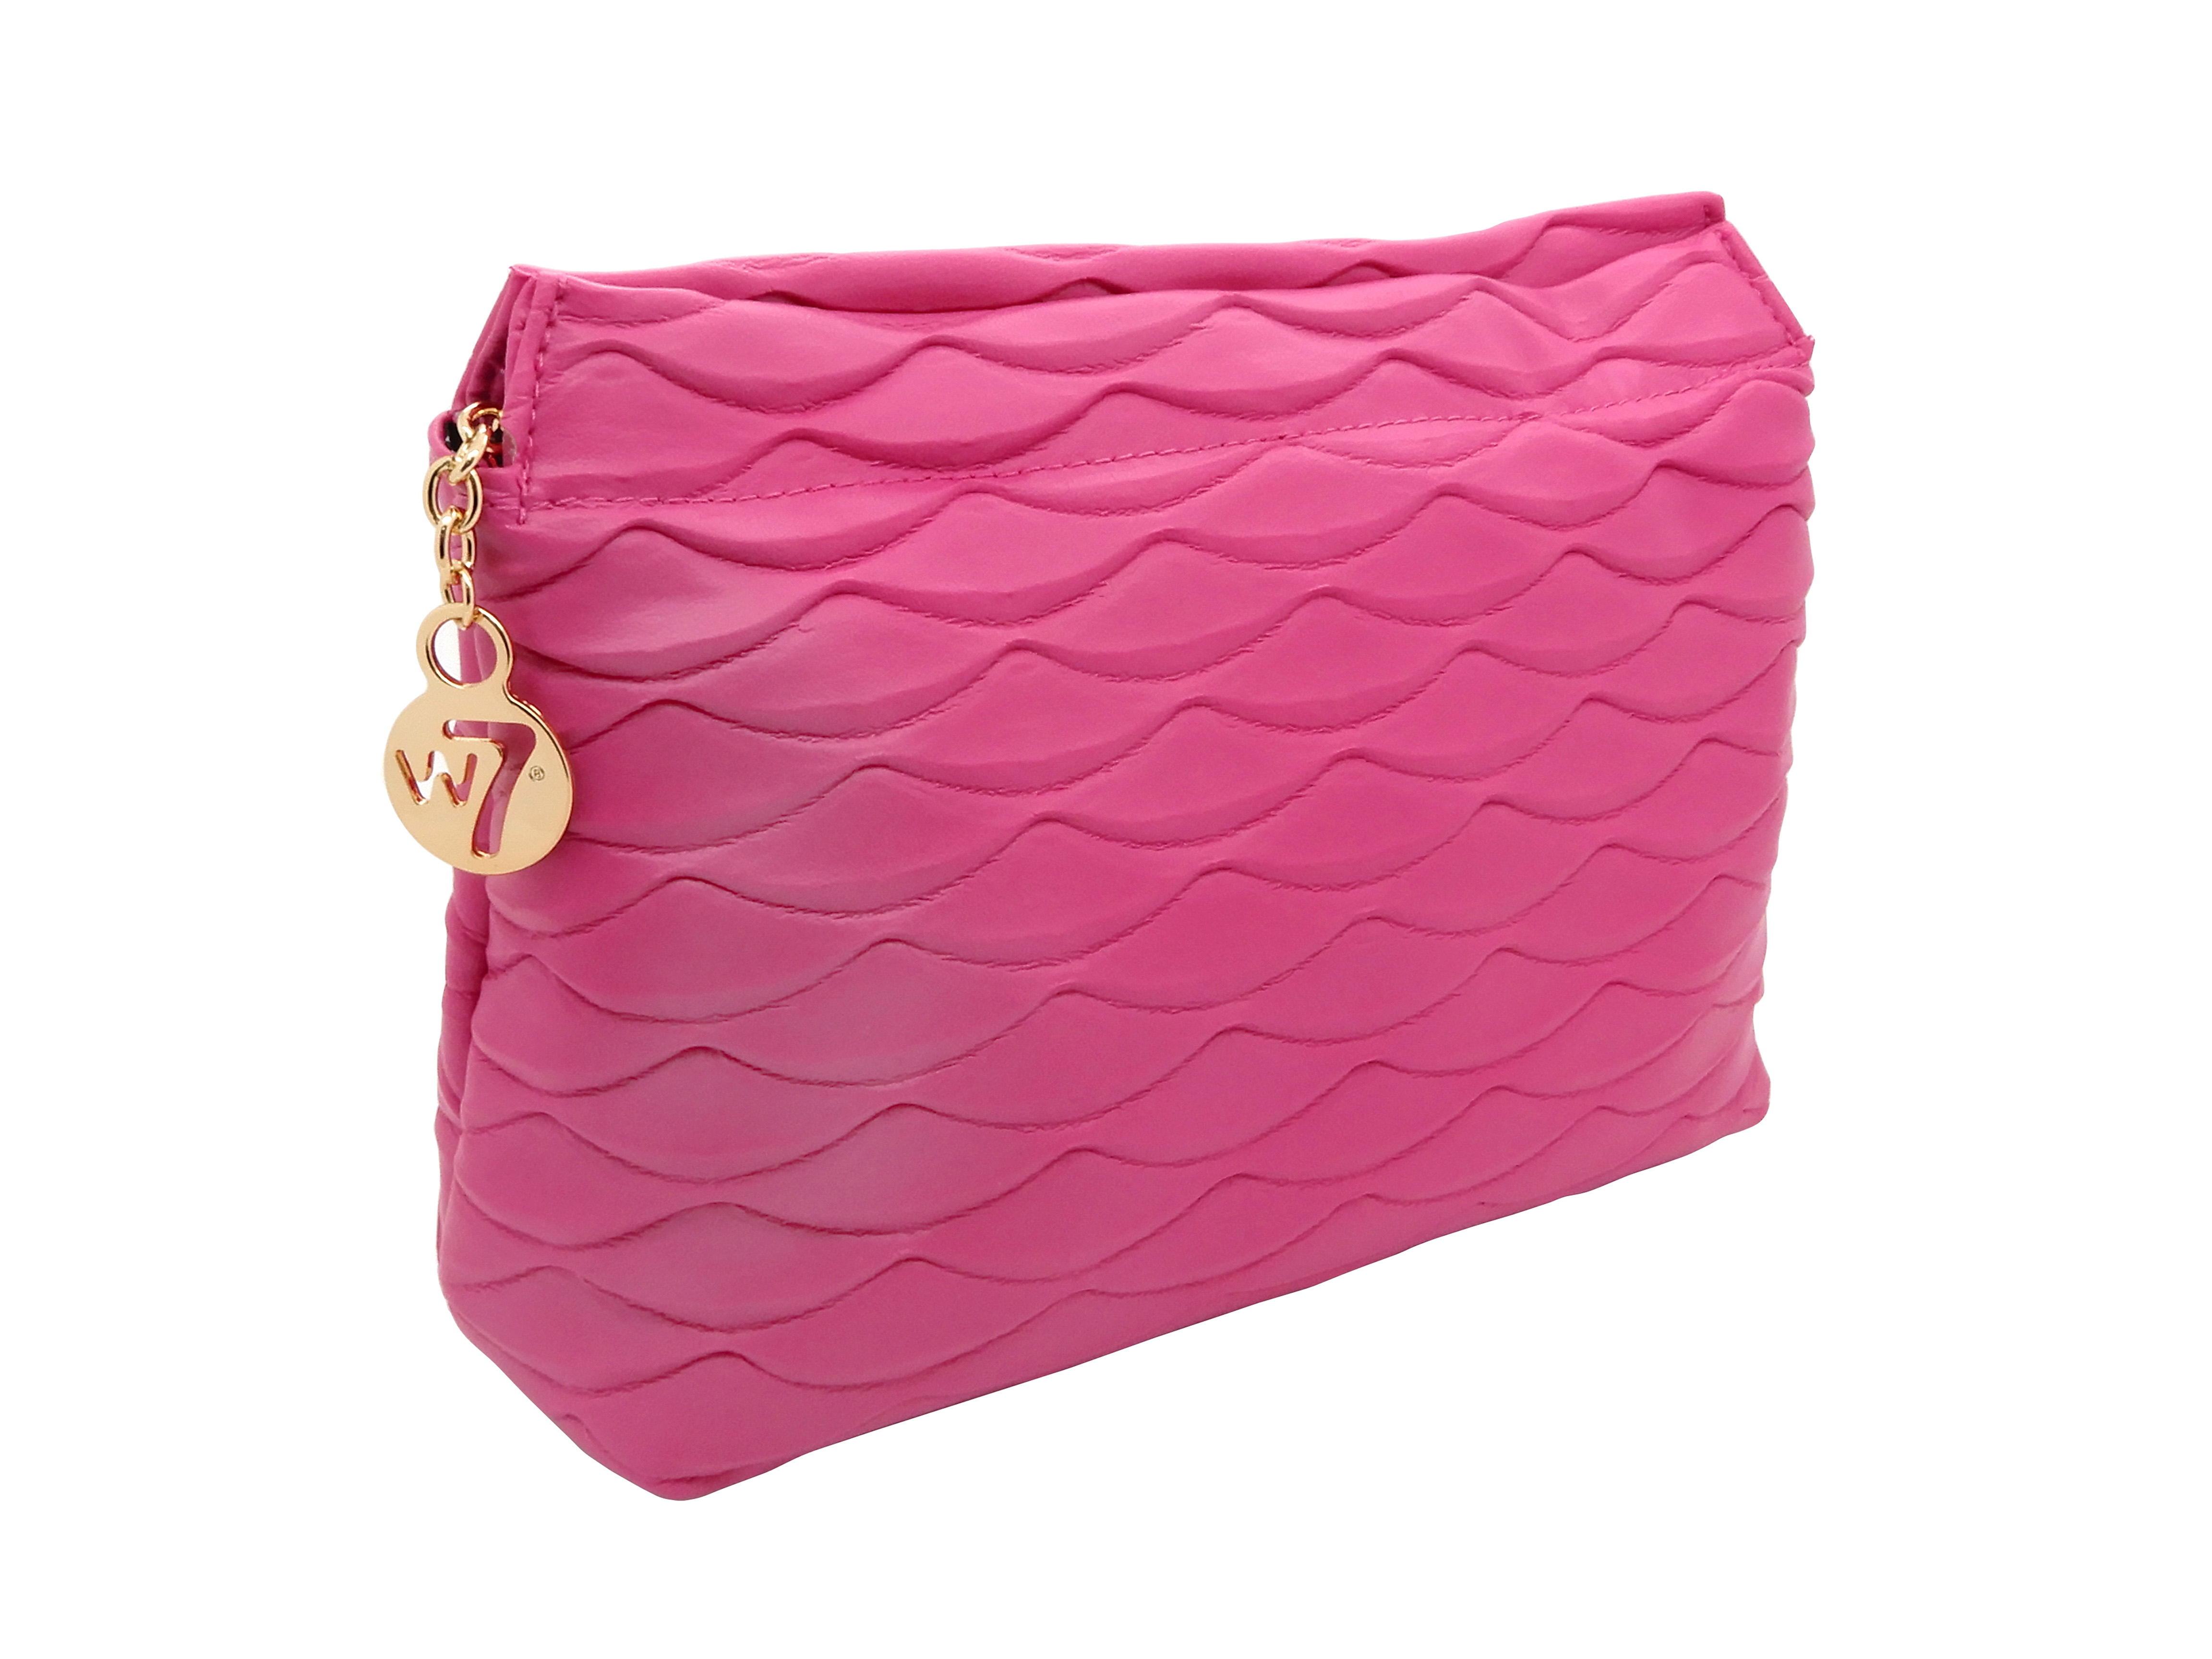 W7 Pink Shell Leather Effect Cosmetic Bag